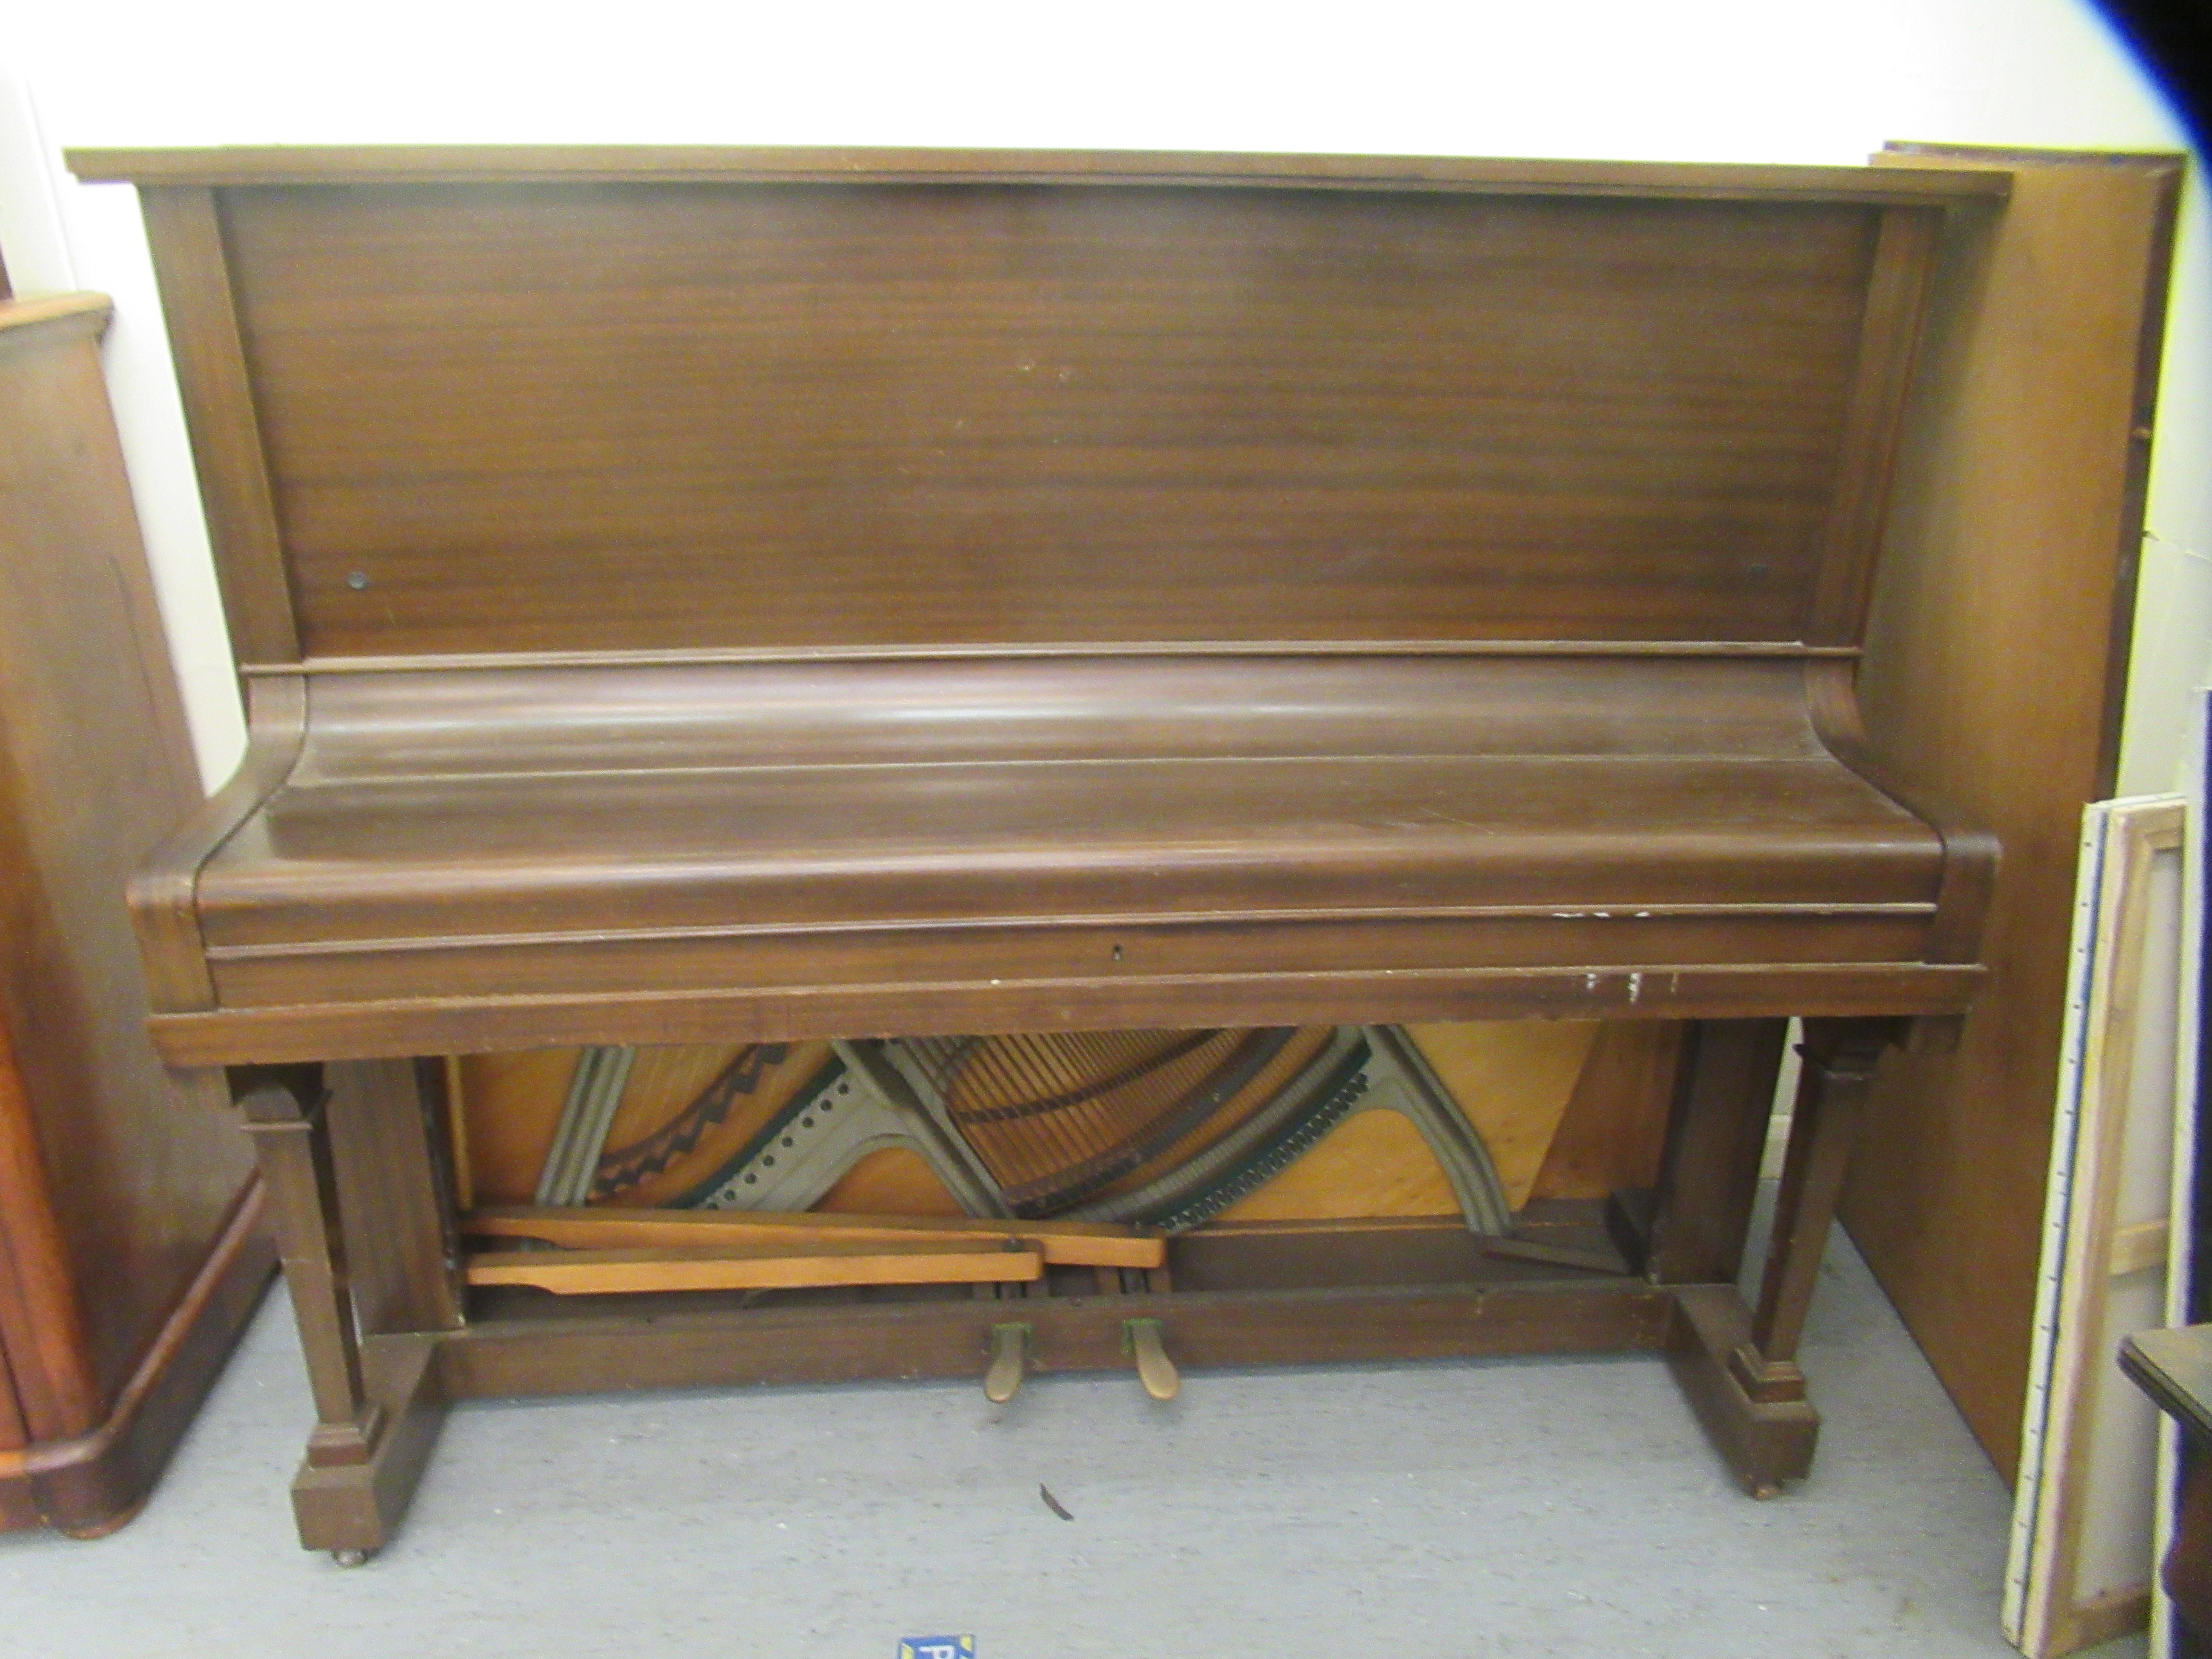 A B Sommerfeld mahogany cased iron framed, overstrung upright piano, no.5729 with forward